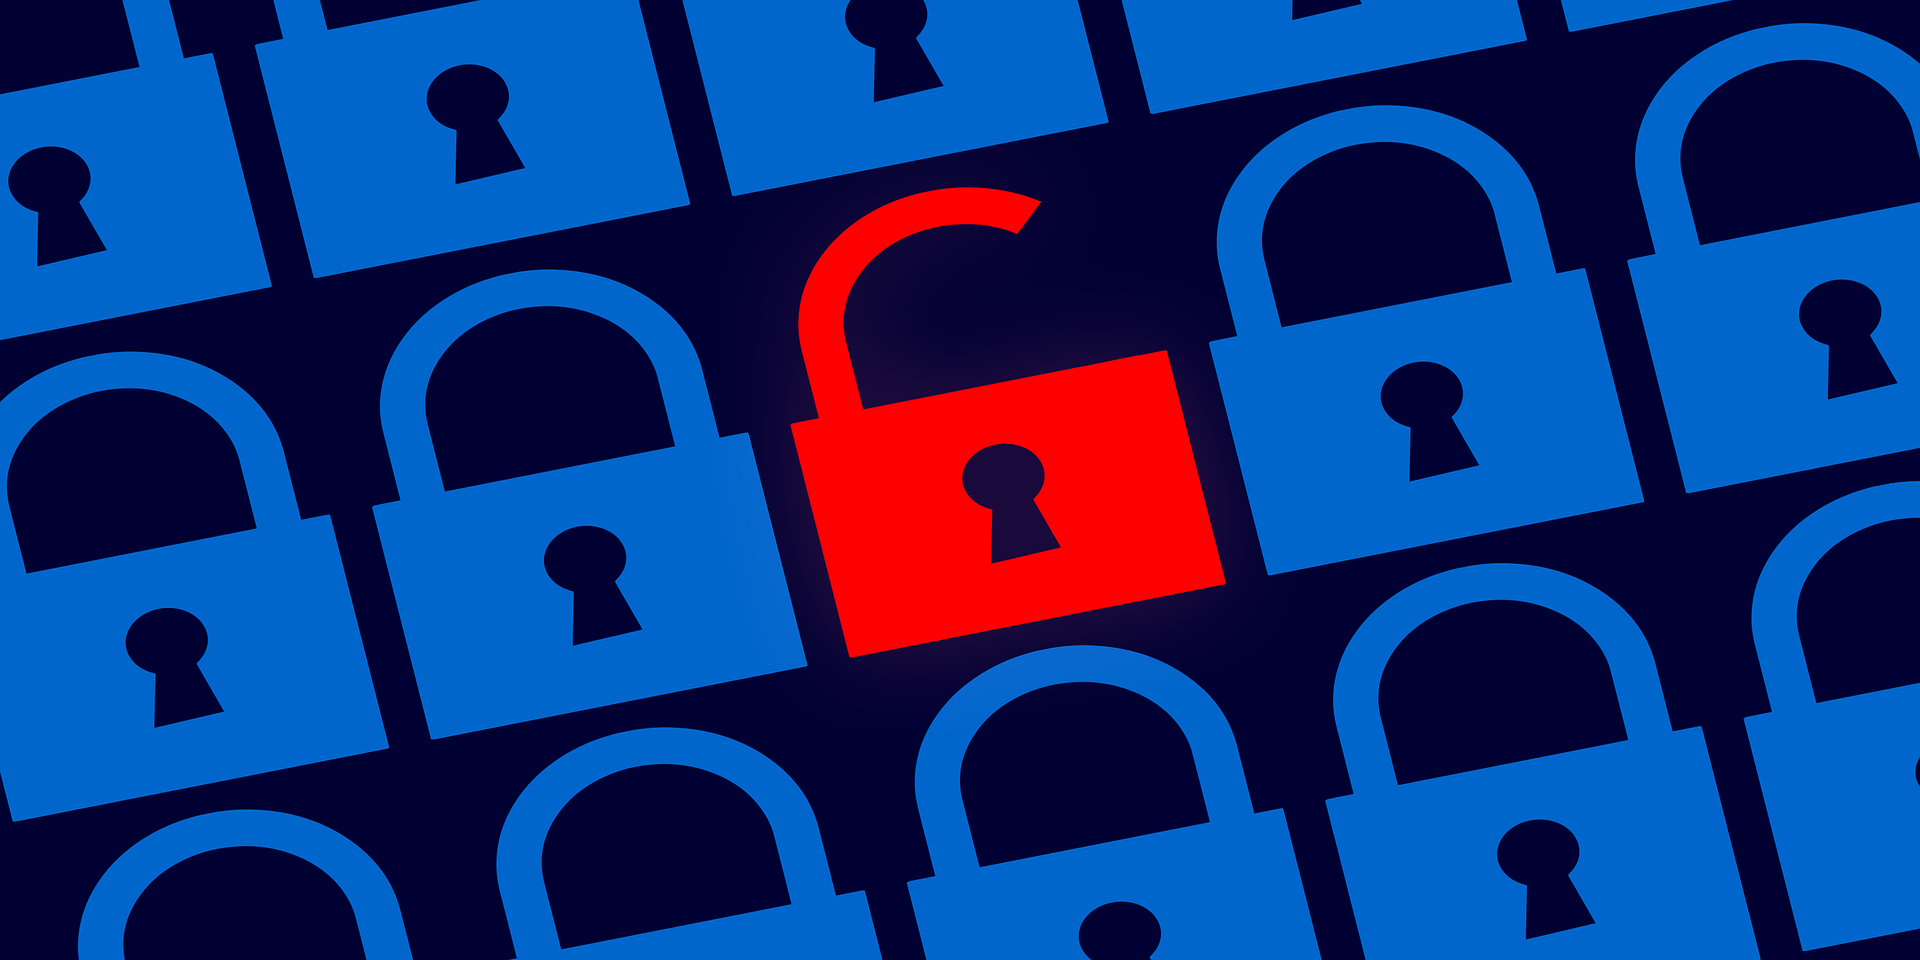 An image of an unlocked red lock surrounded by locked blue locks.